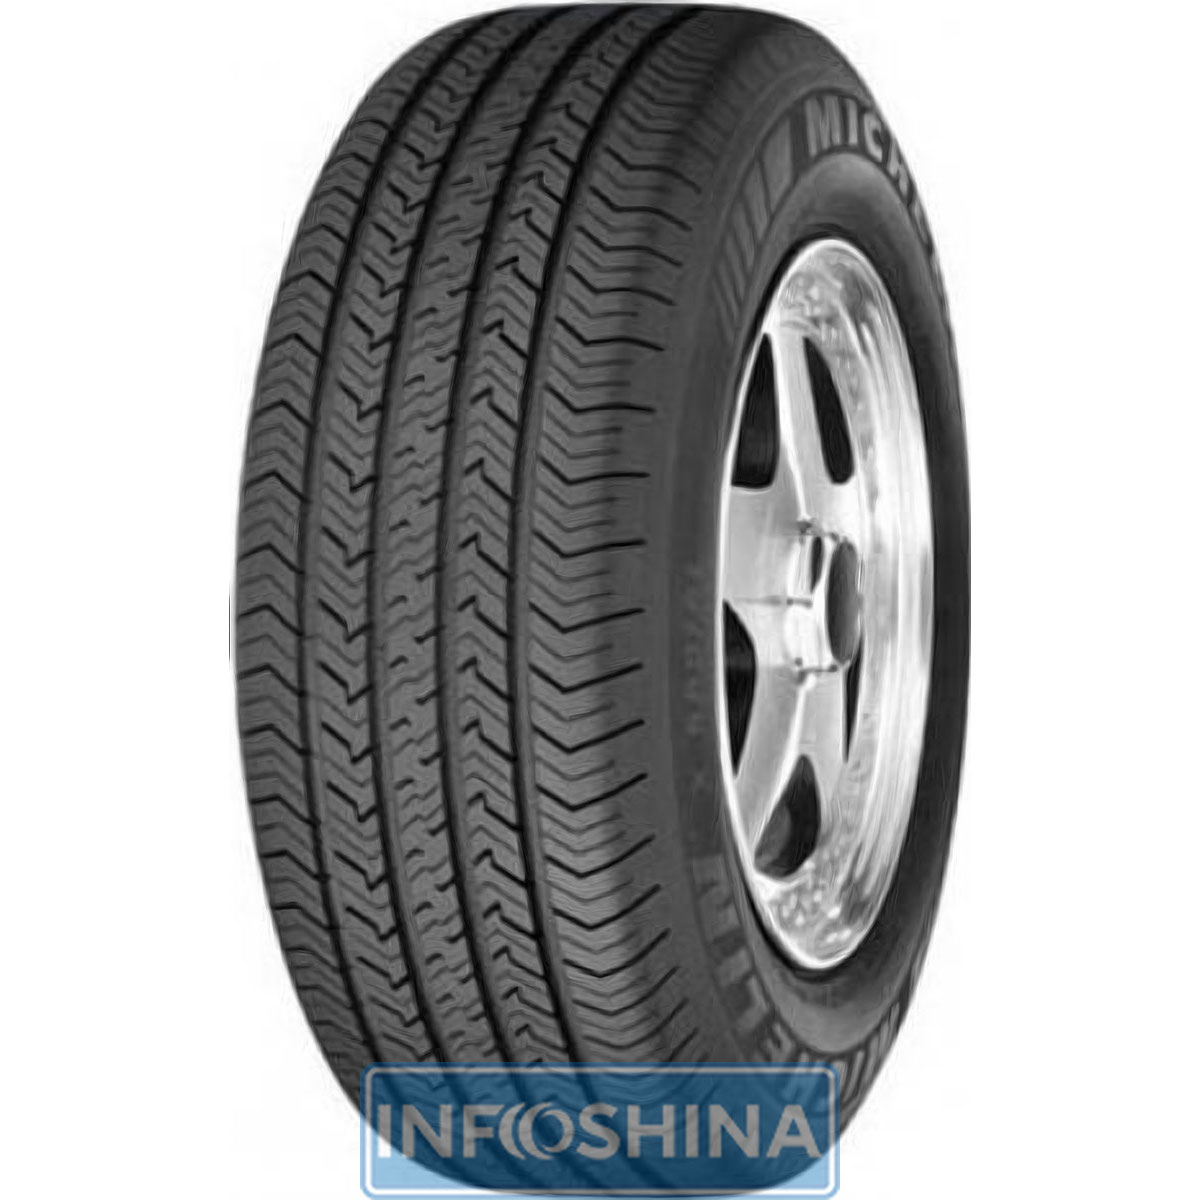 Michelin X-Radial DT